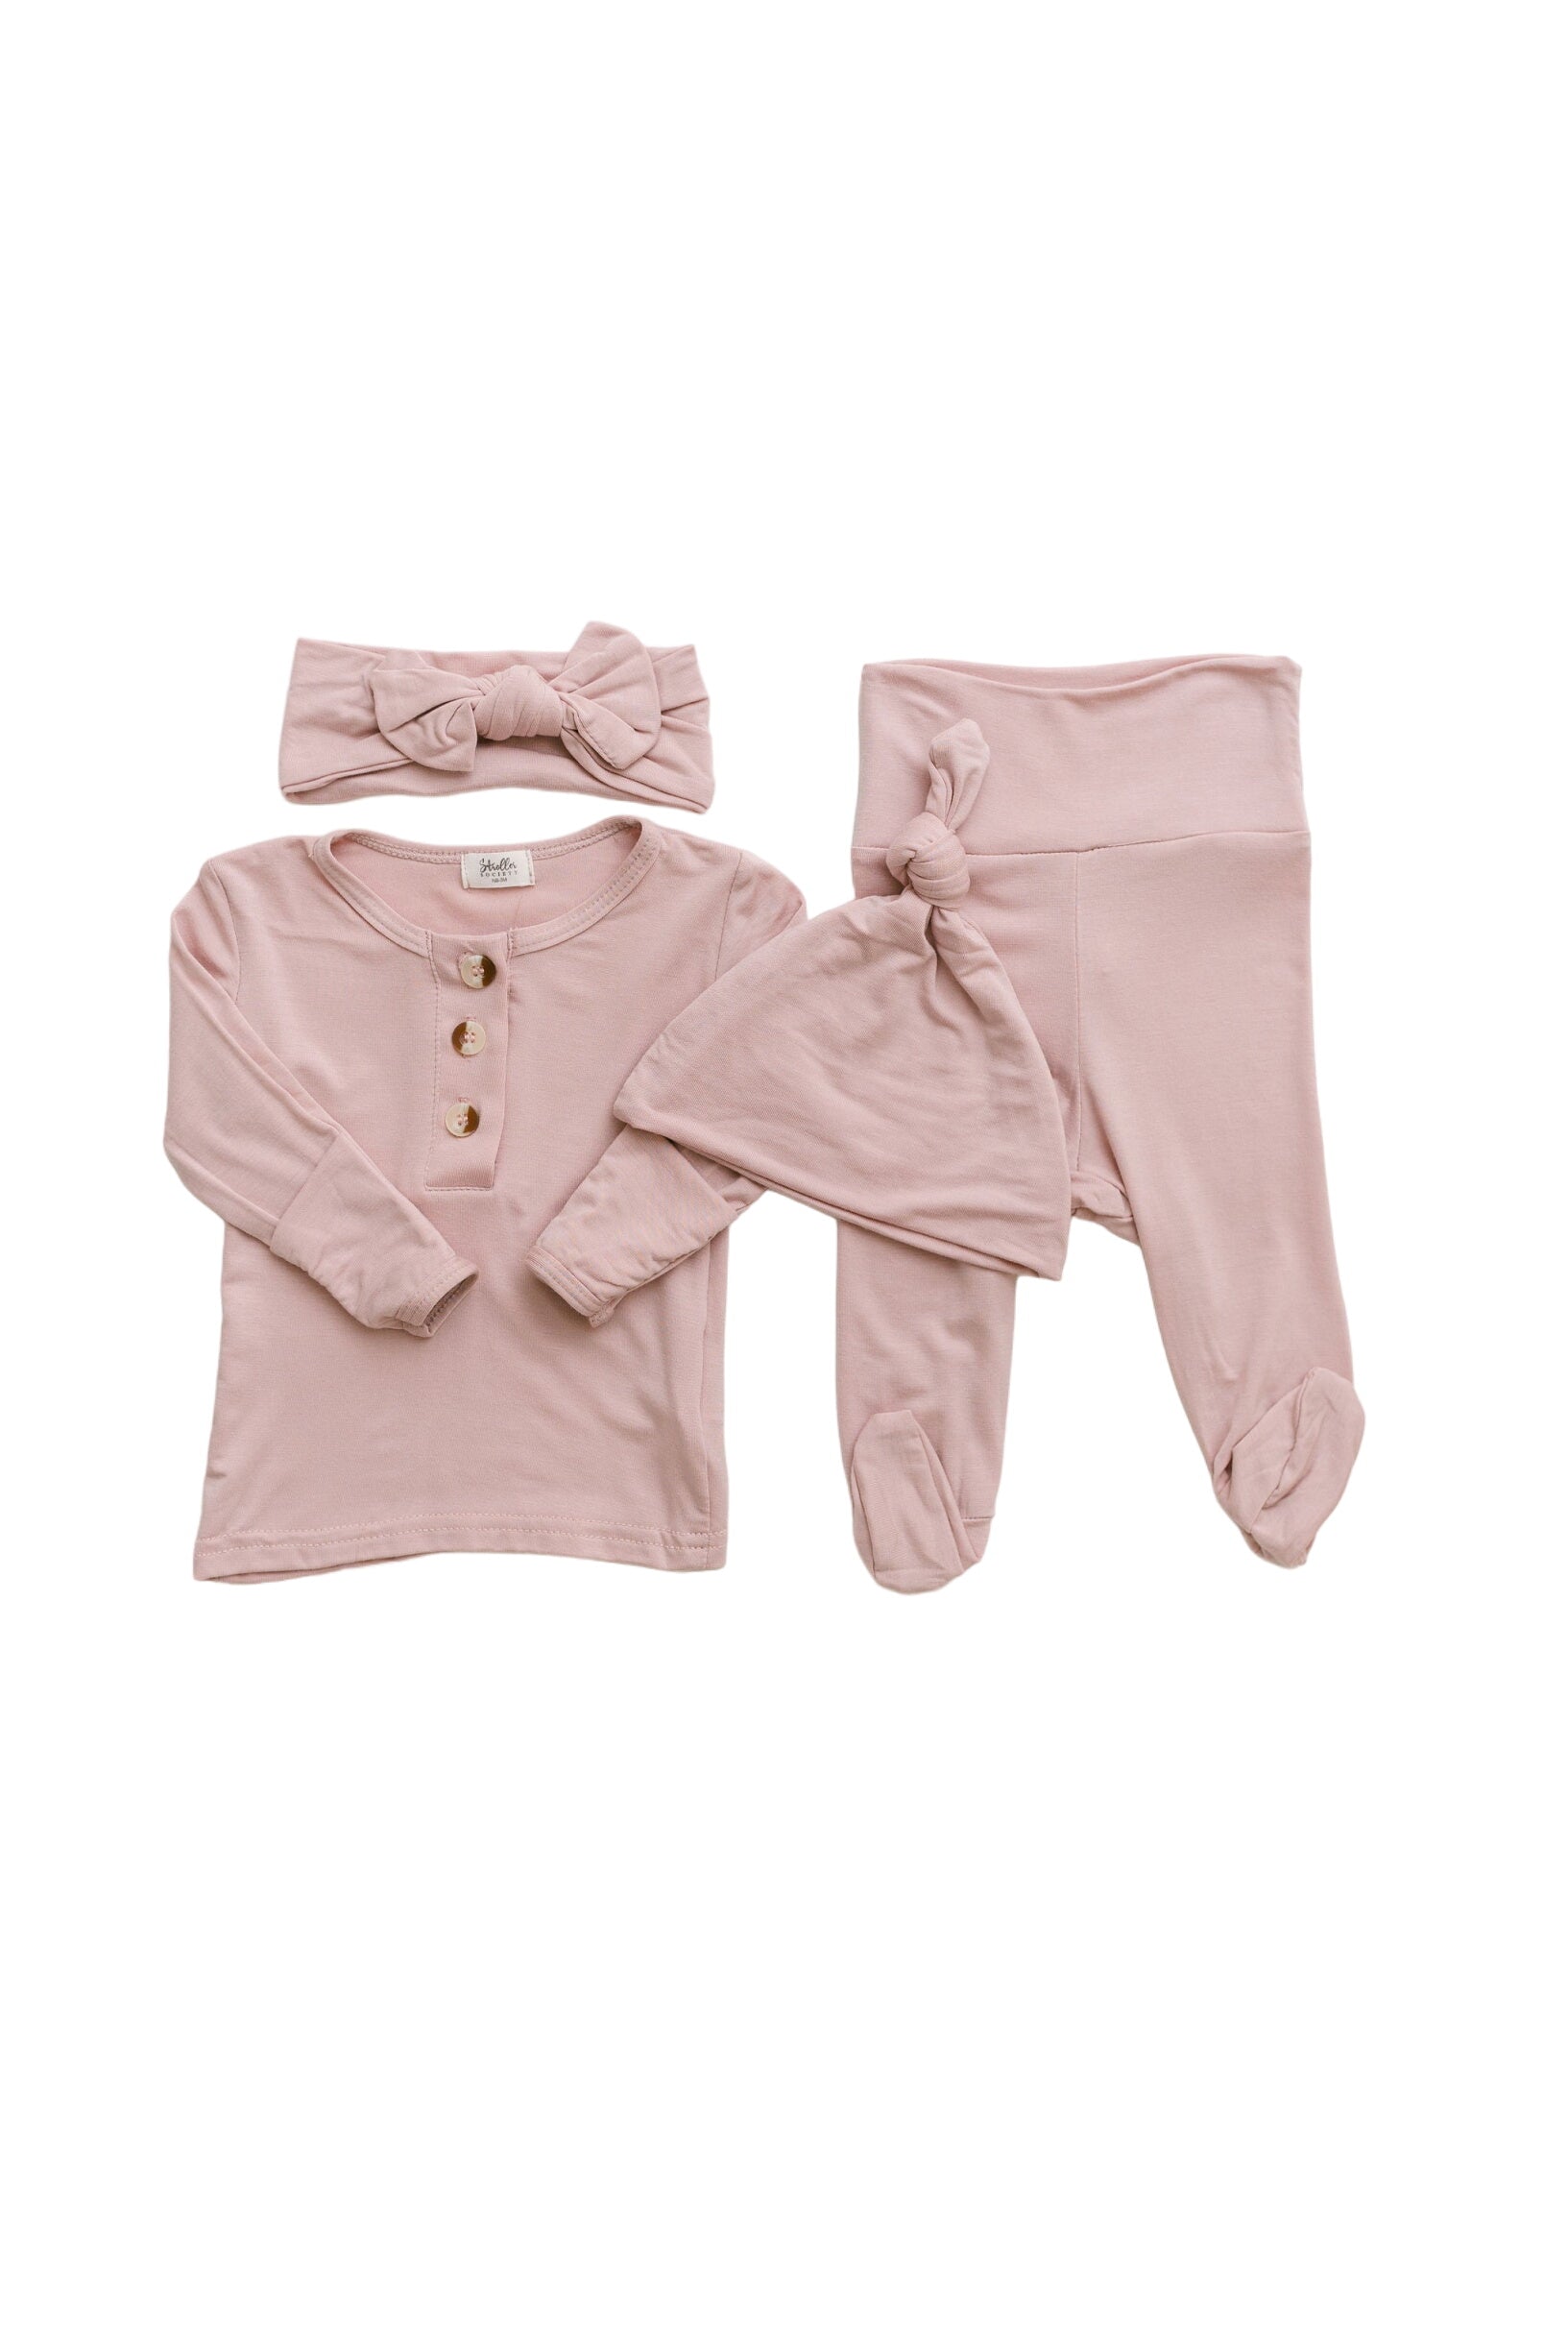 Top And Bottom Outfit, Hat And Headband Set (newborn - 12 Months) - Dusty Rose